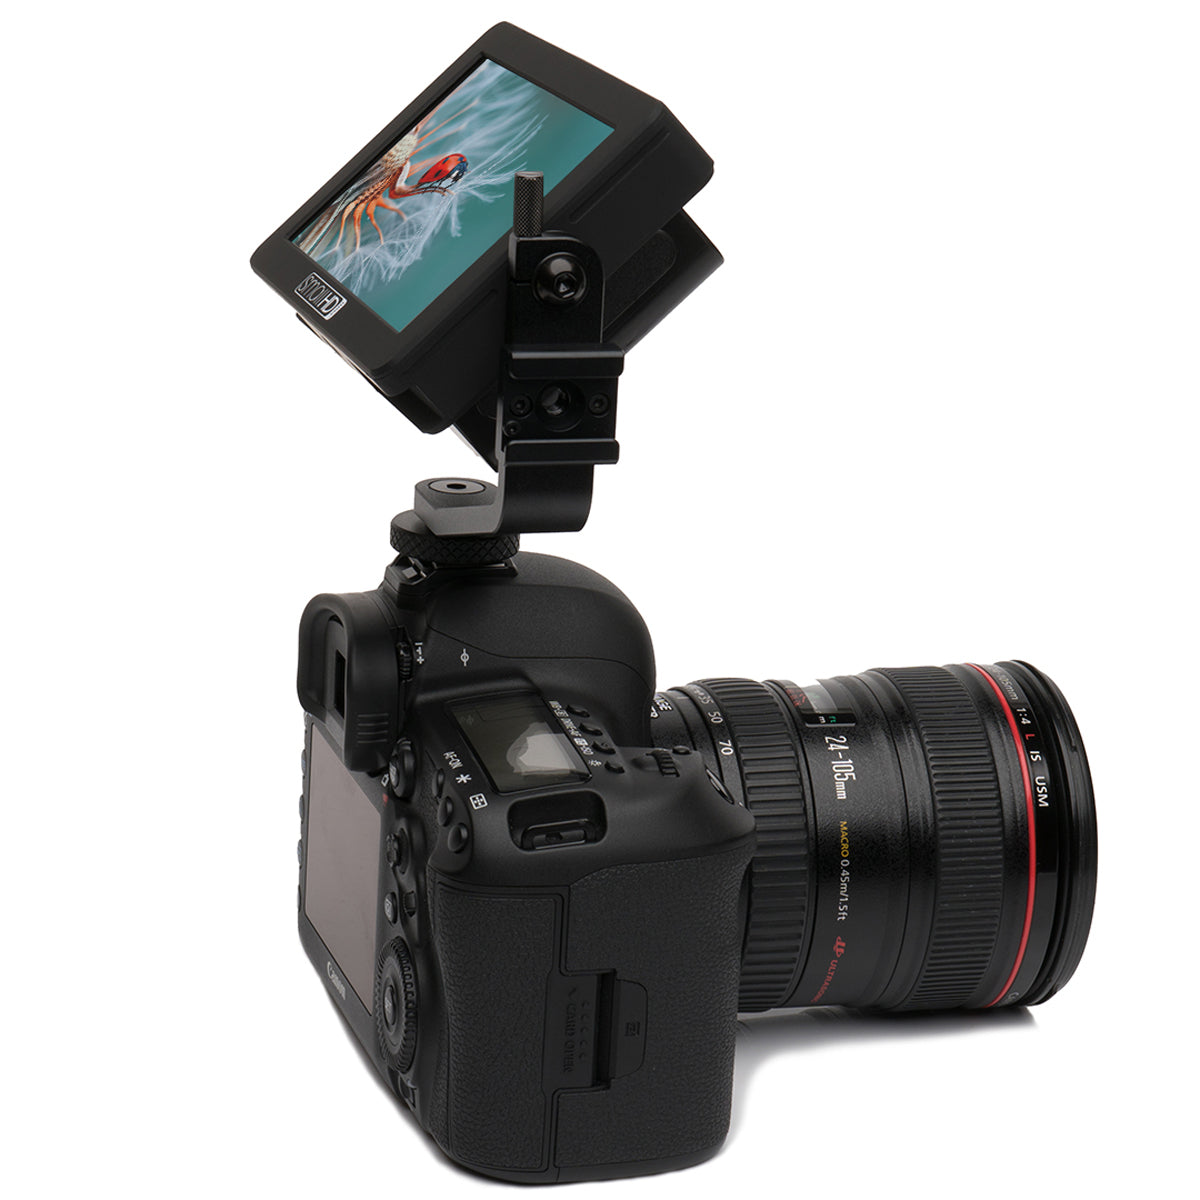 SmallHD FOCUS 5” Touchscreen Sony Bundle with NP-FW50